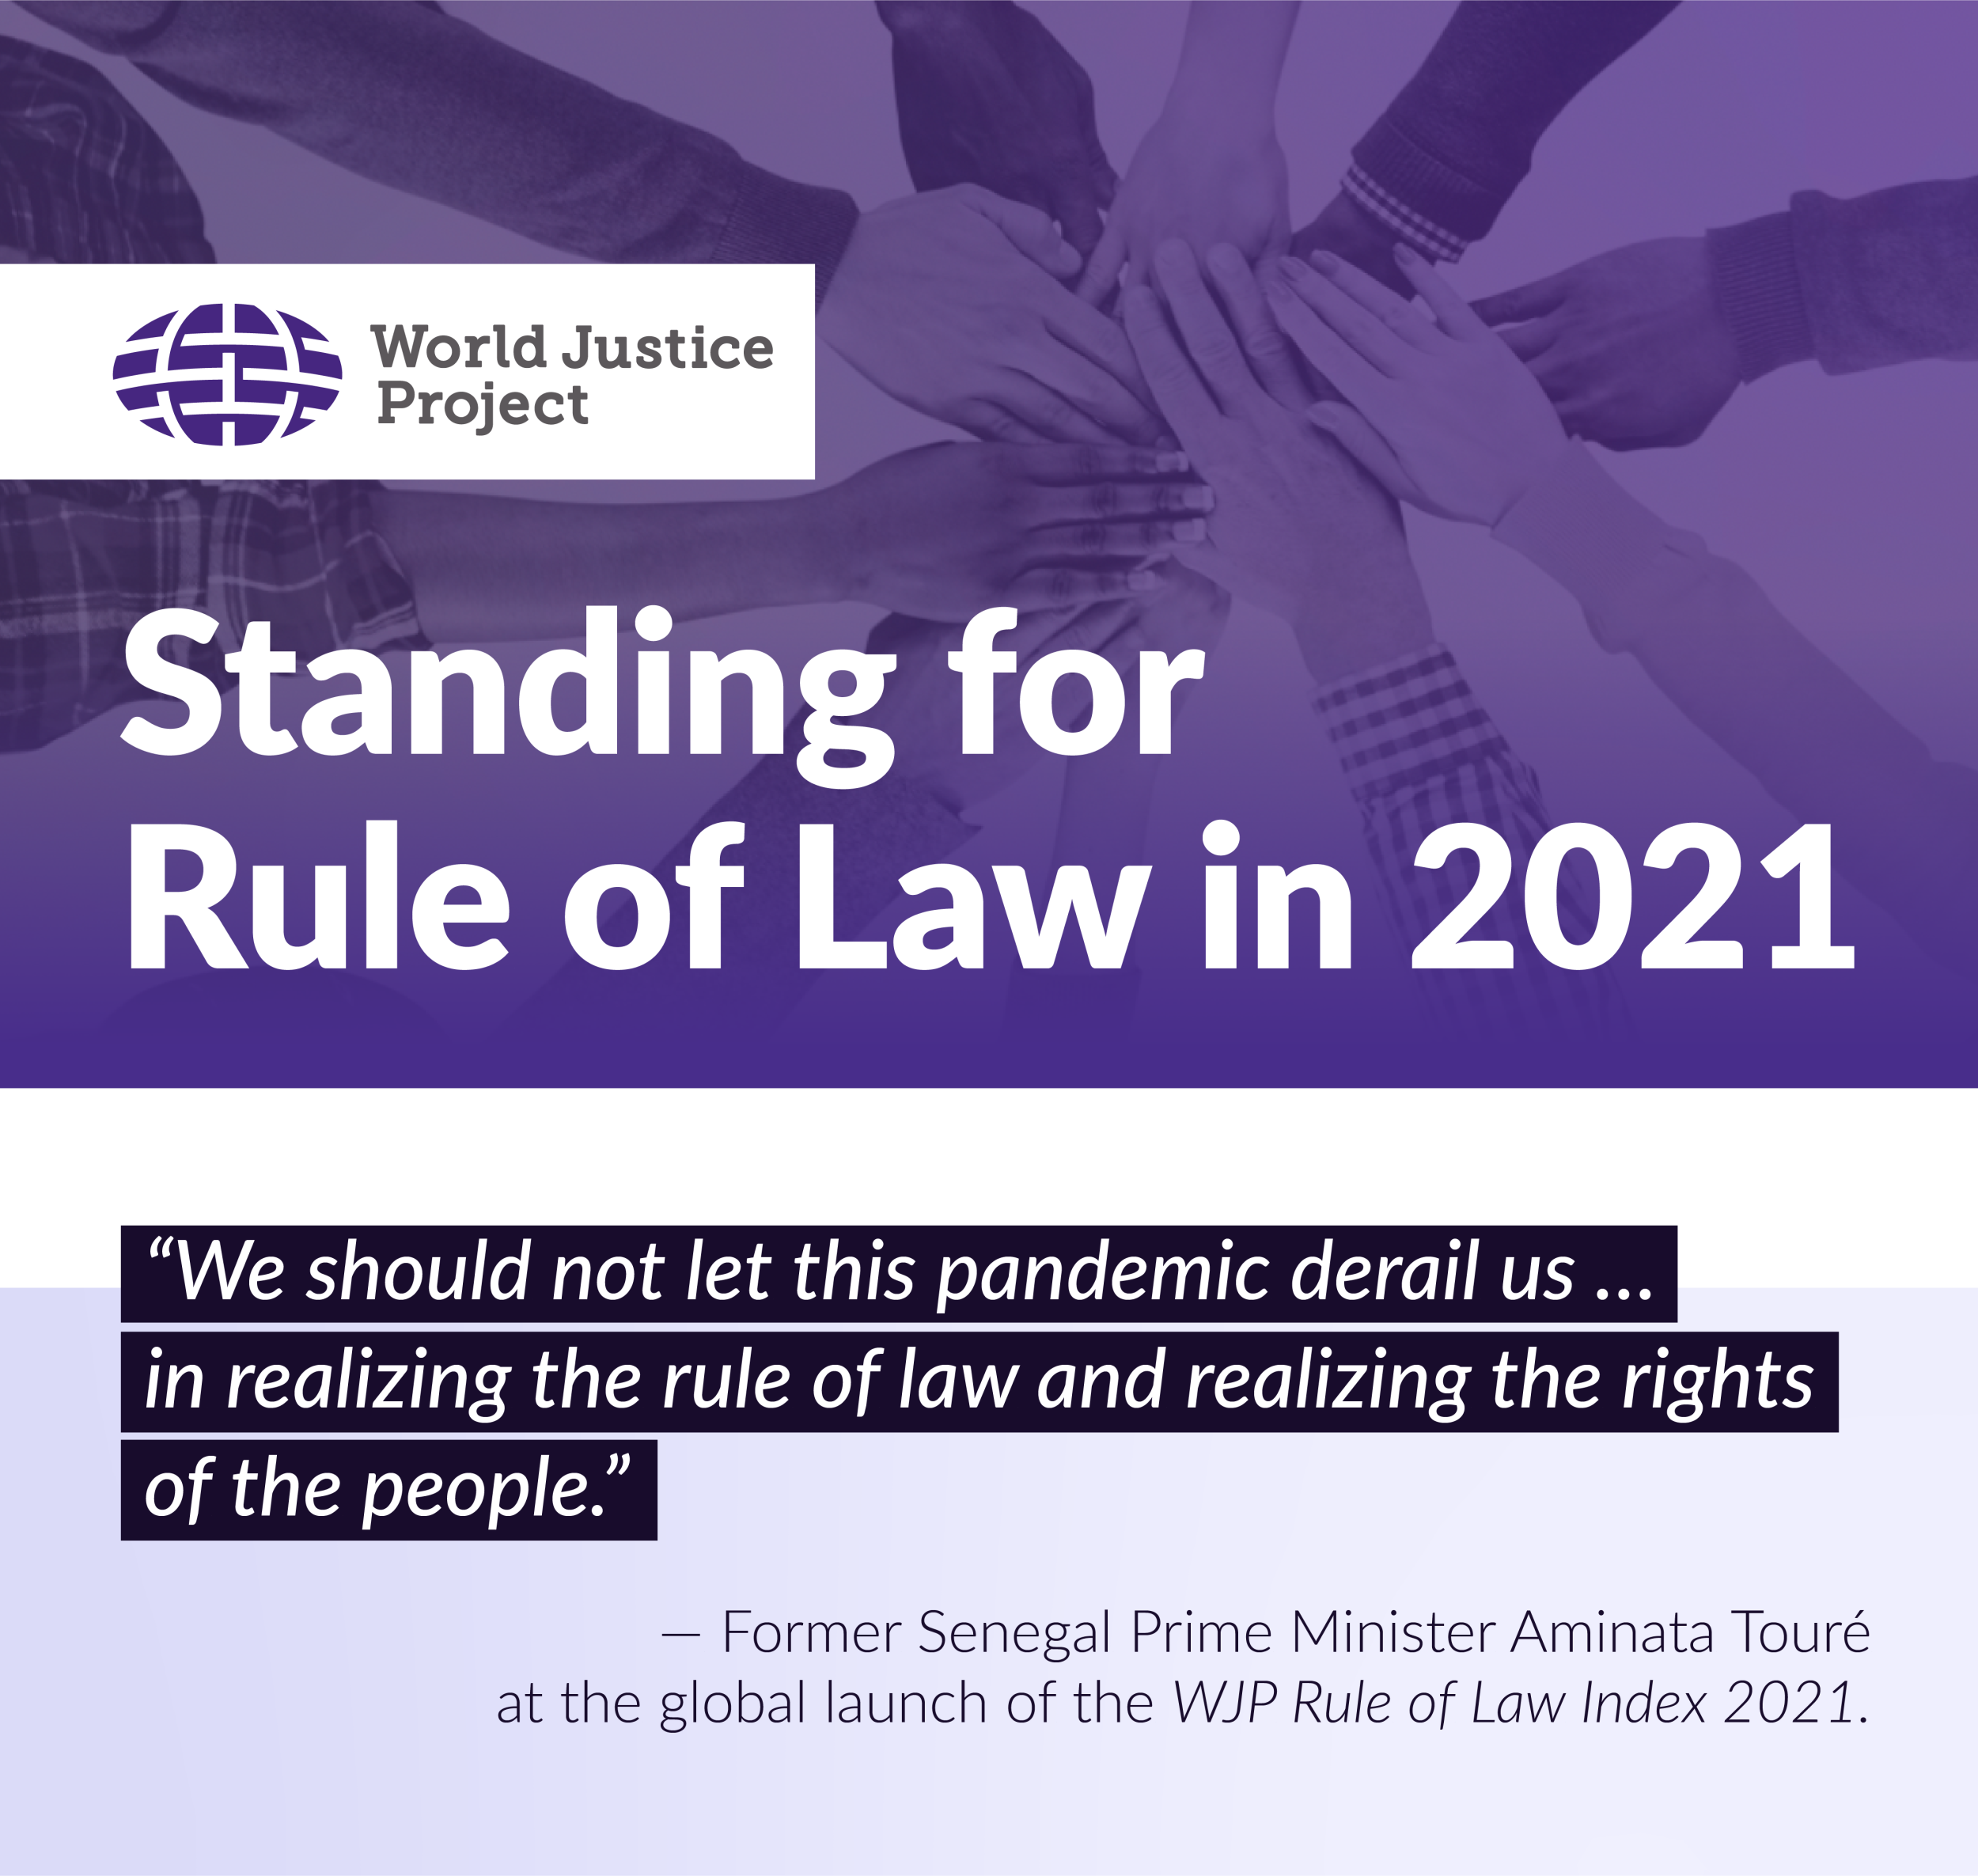 Standing for the Rule of Law in 2021